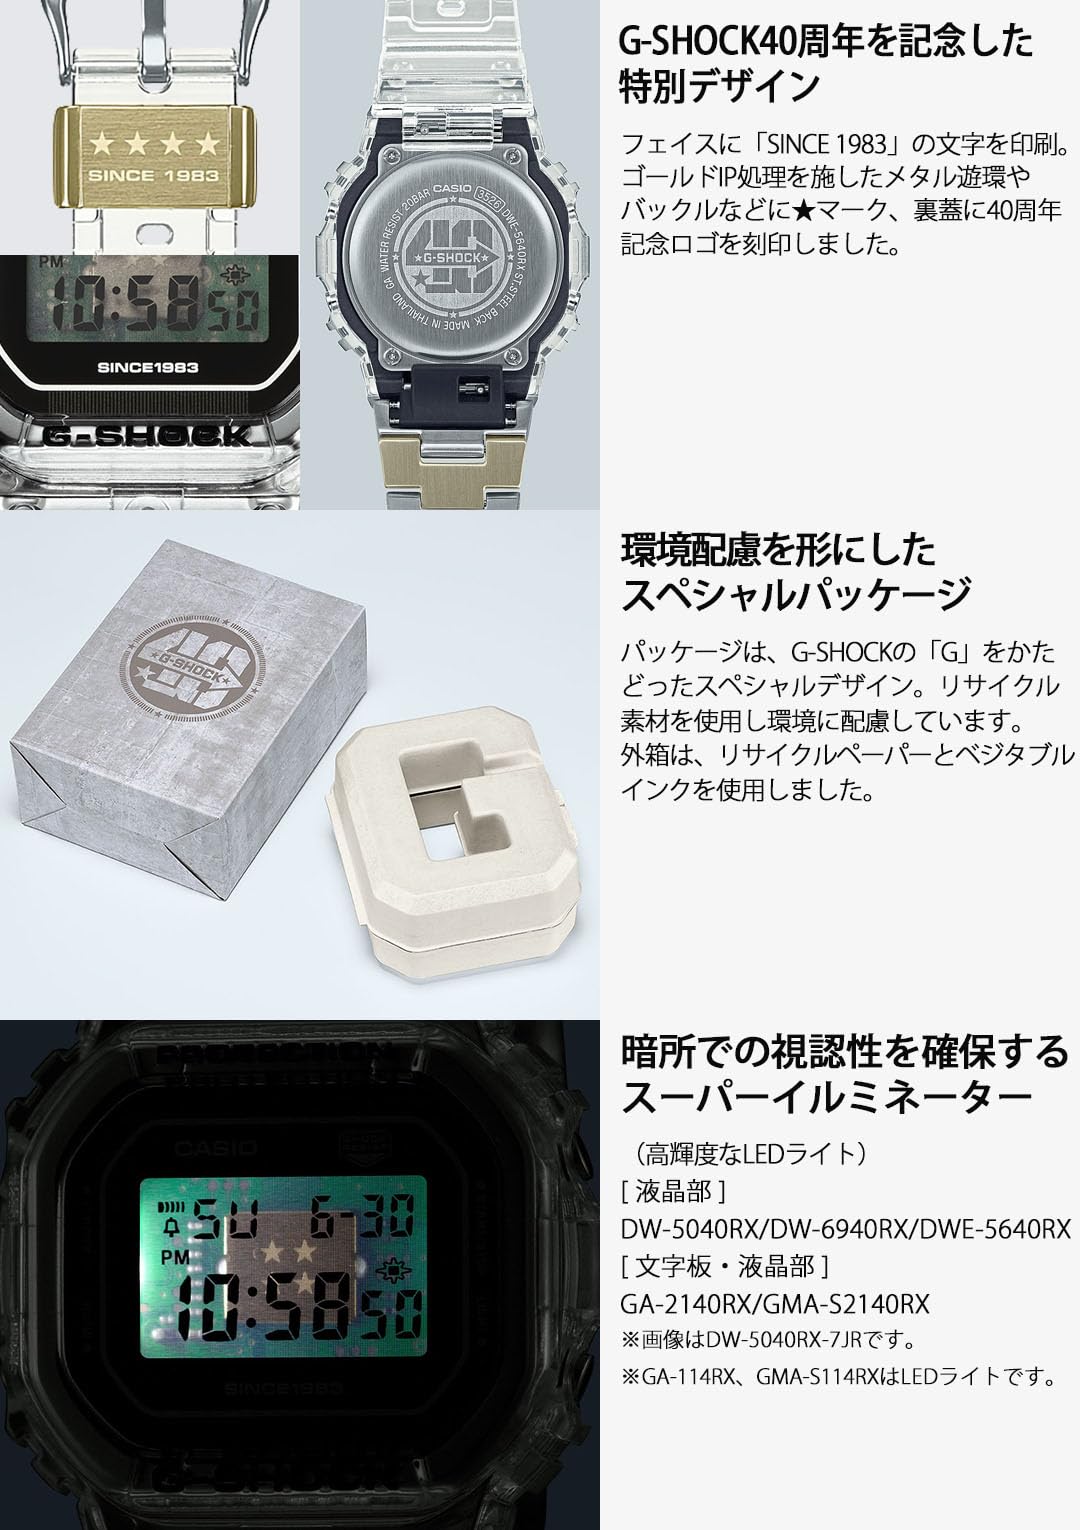 [Casio] G-Shock Watch [Domestic Genuine Product] G-SHOCK 40th Anniversary Clear Remix DW-6940RX-7JR Men's Clear - BanzaiHobby